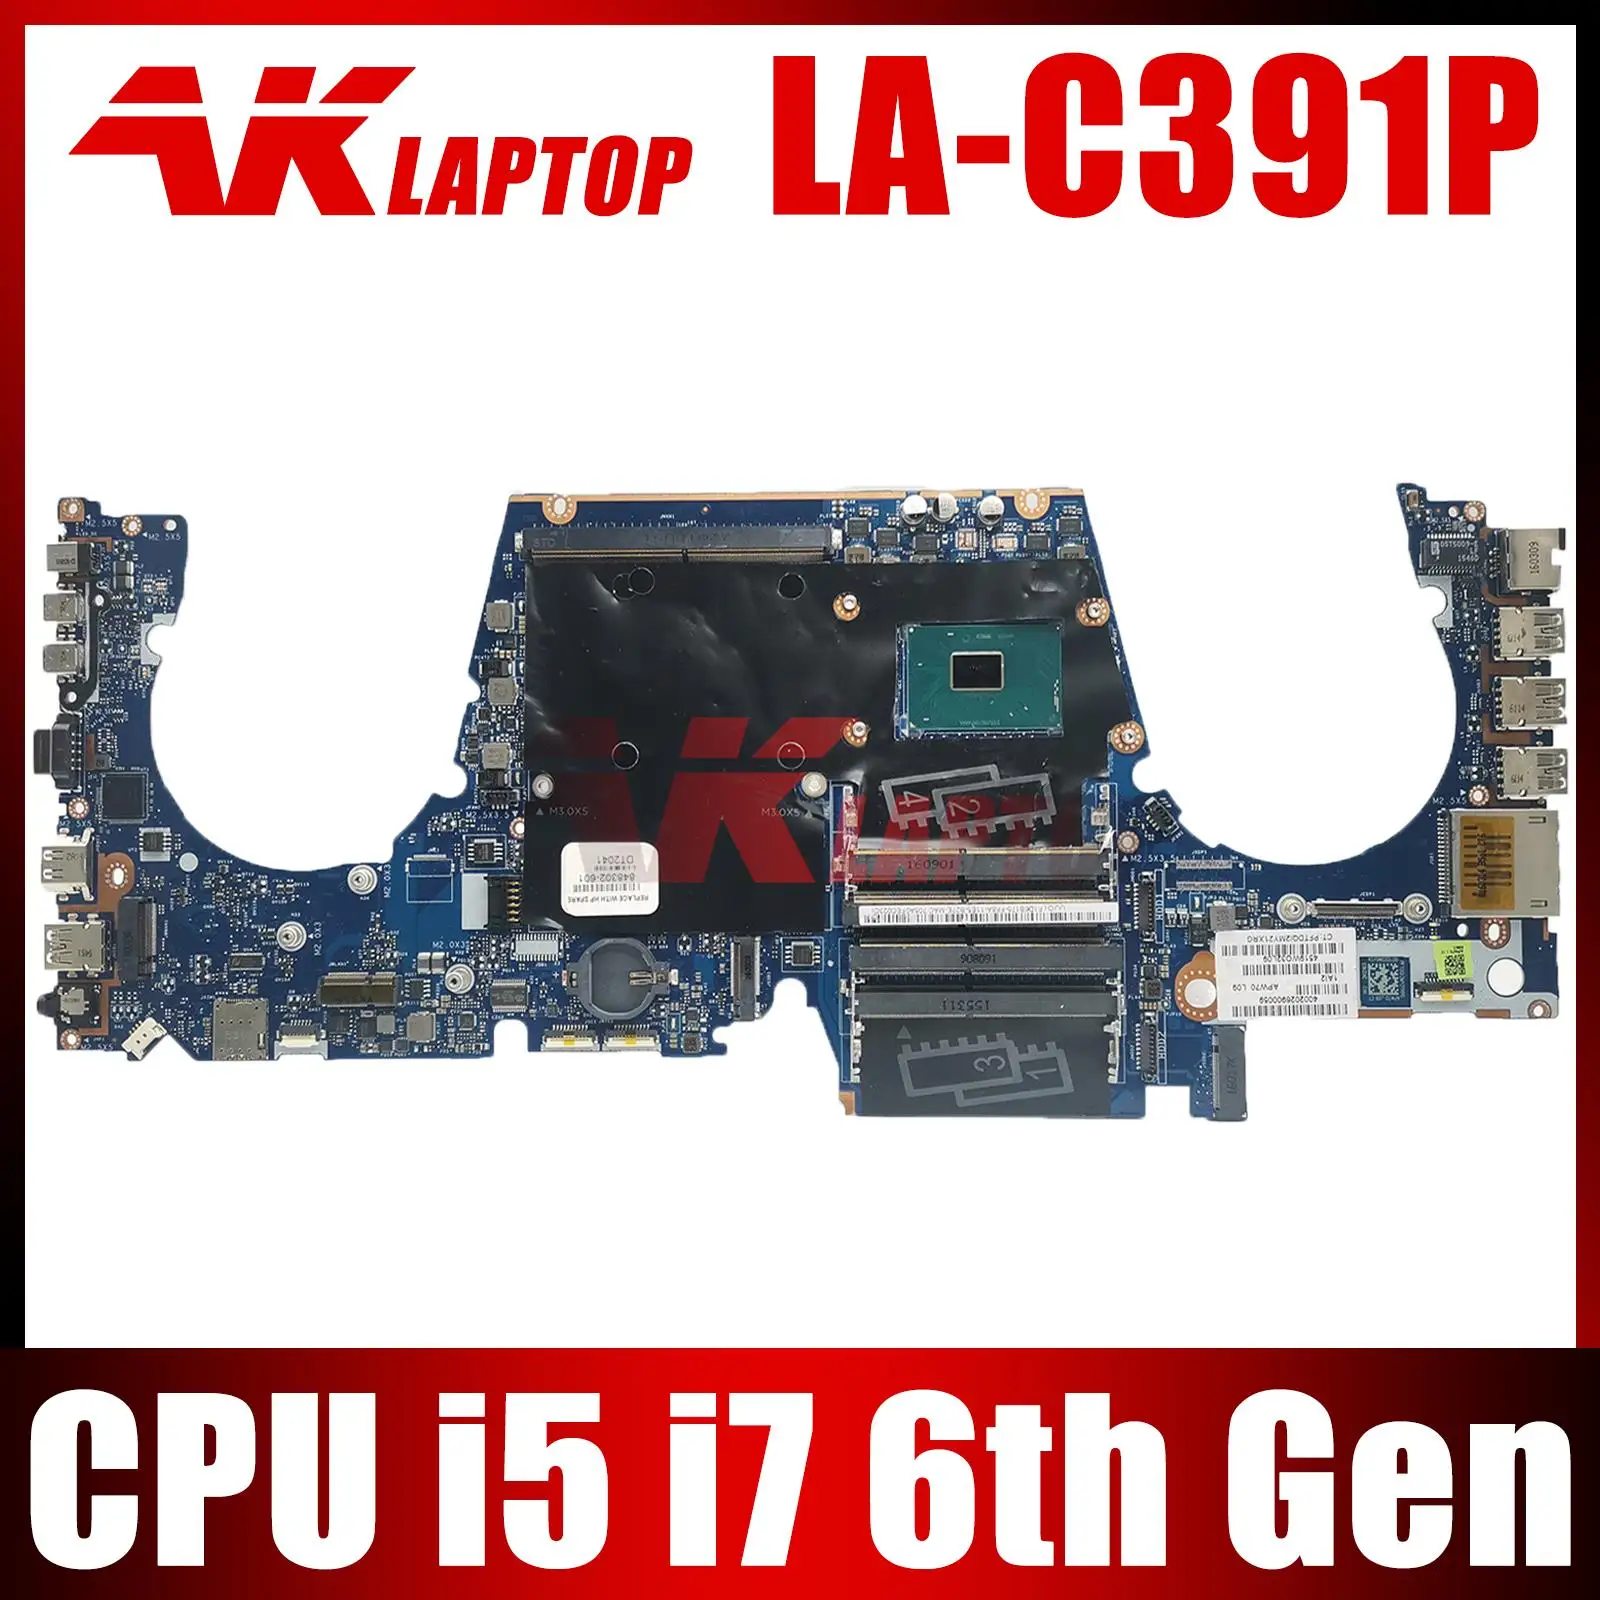 

For HP Zbook 17 G3 Laptop Motherboard Mainboard LA-C391P Motherboard with I5 I7 6th Gen HQ E3-1535M V5 CPU DDR4 Mainboard